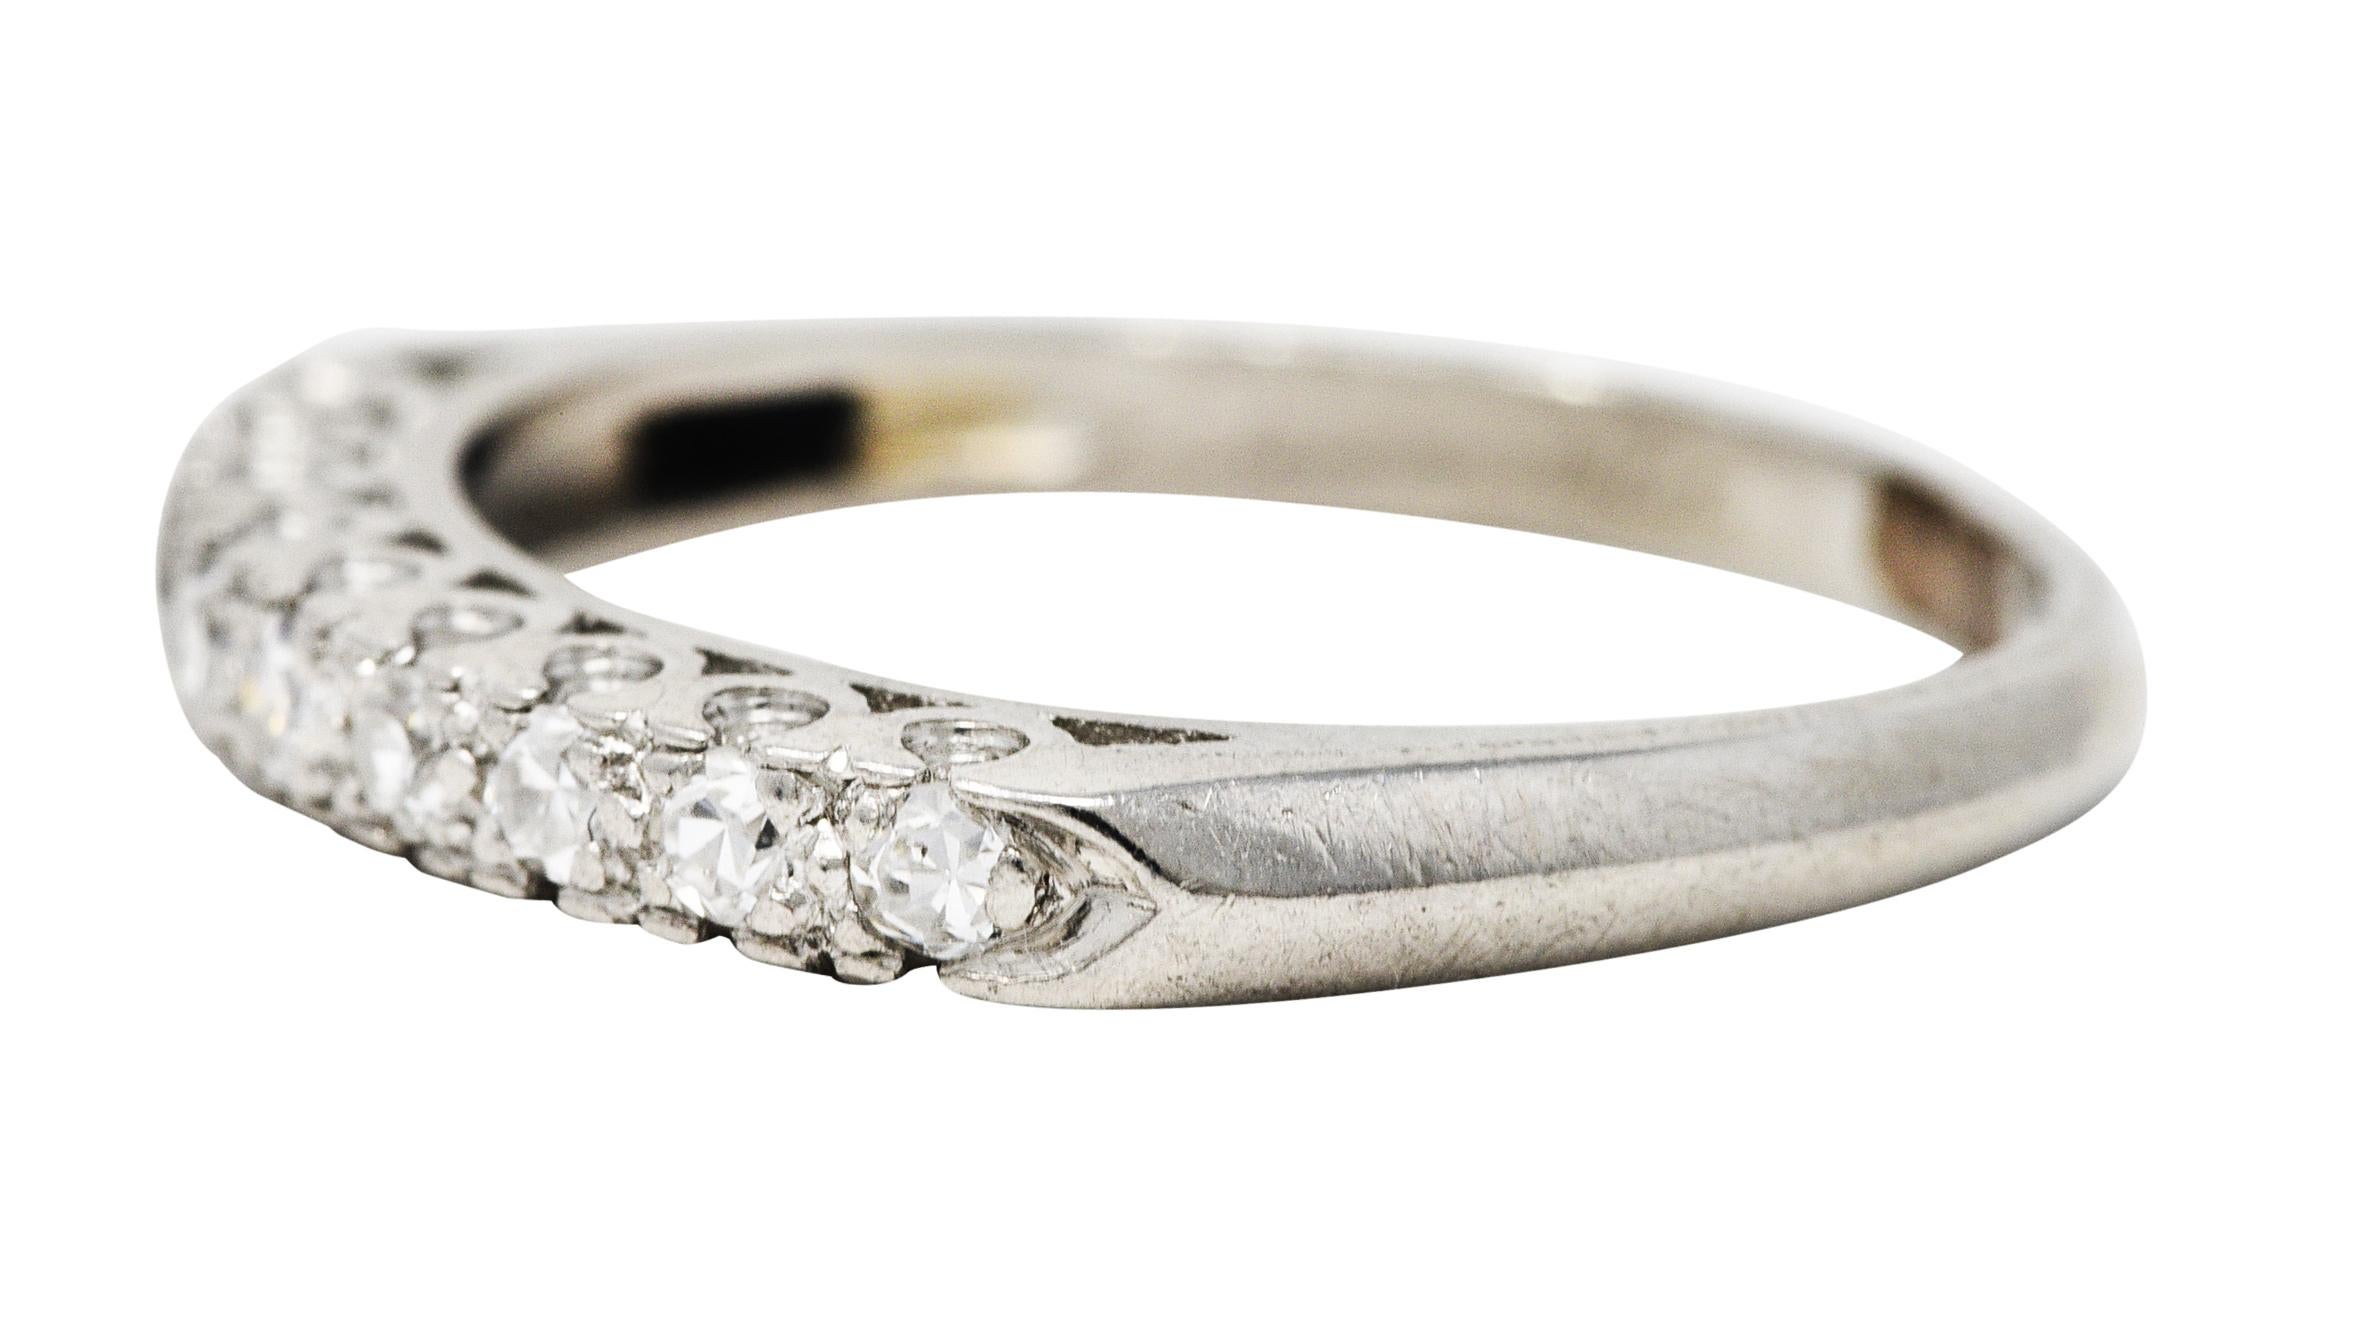 Band is set to front by single cut diamonds and flanked by pointed shoulders

Weighing in total approximately 0.25 carat - eye clean and bright

With subtle cathedral shoulders and a scooped fishtail profile motif

Inscribed and stamped for